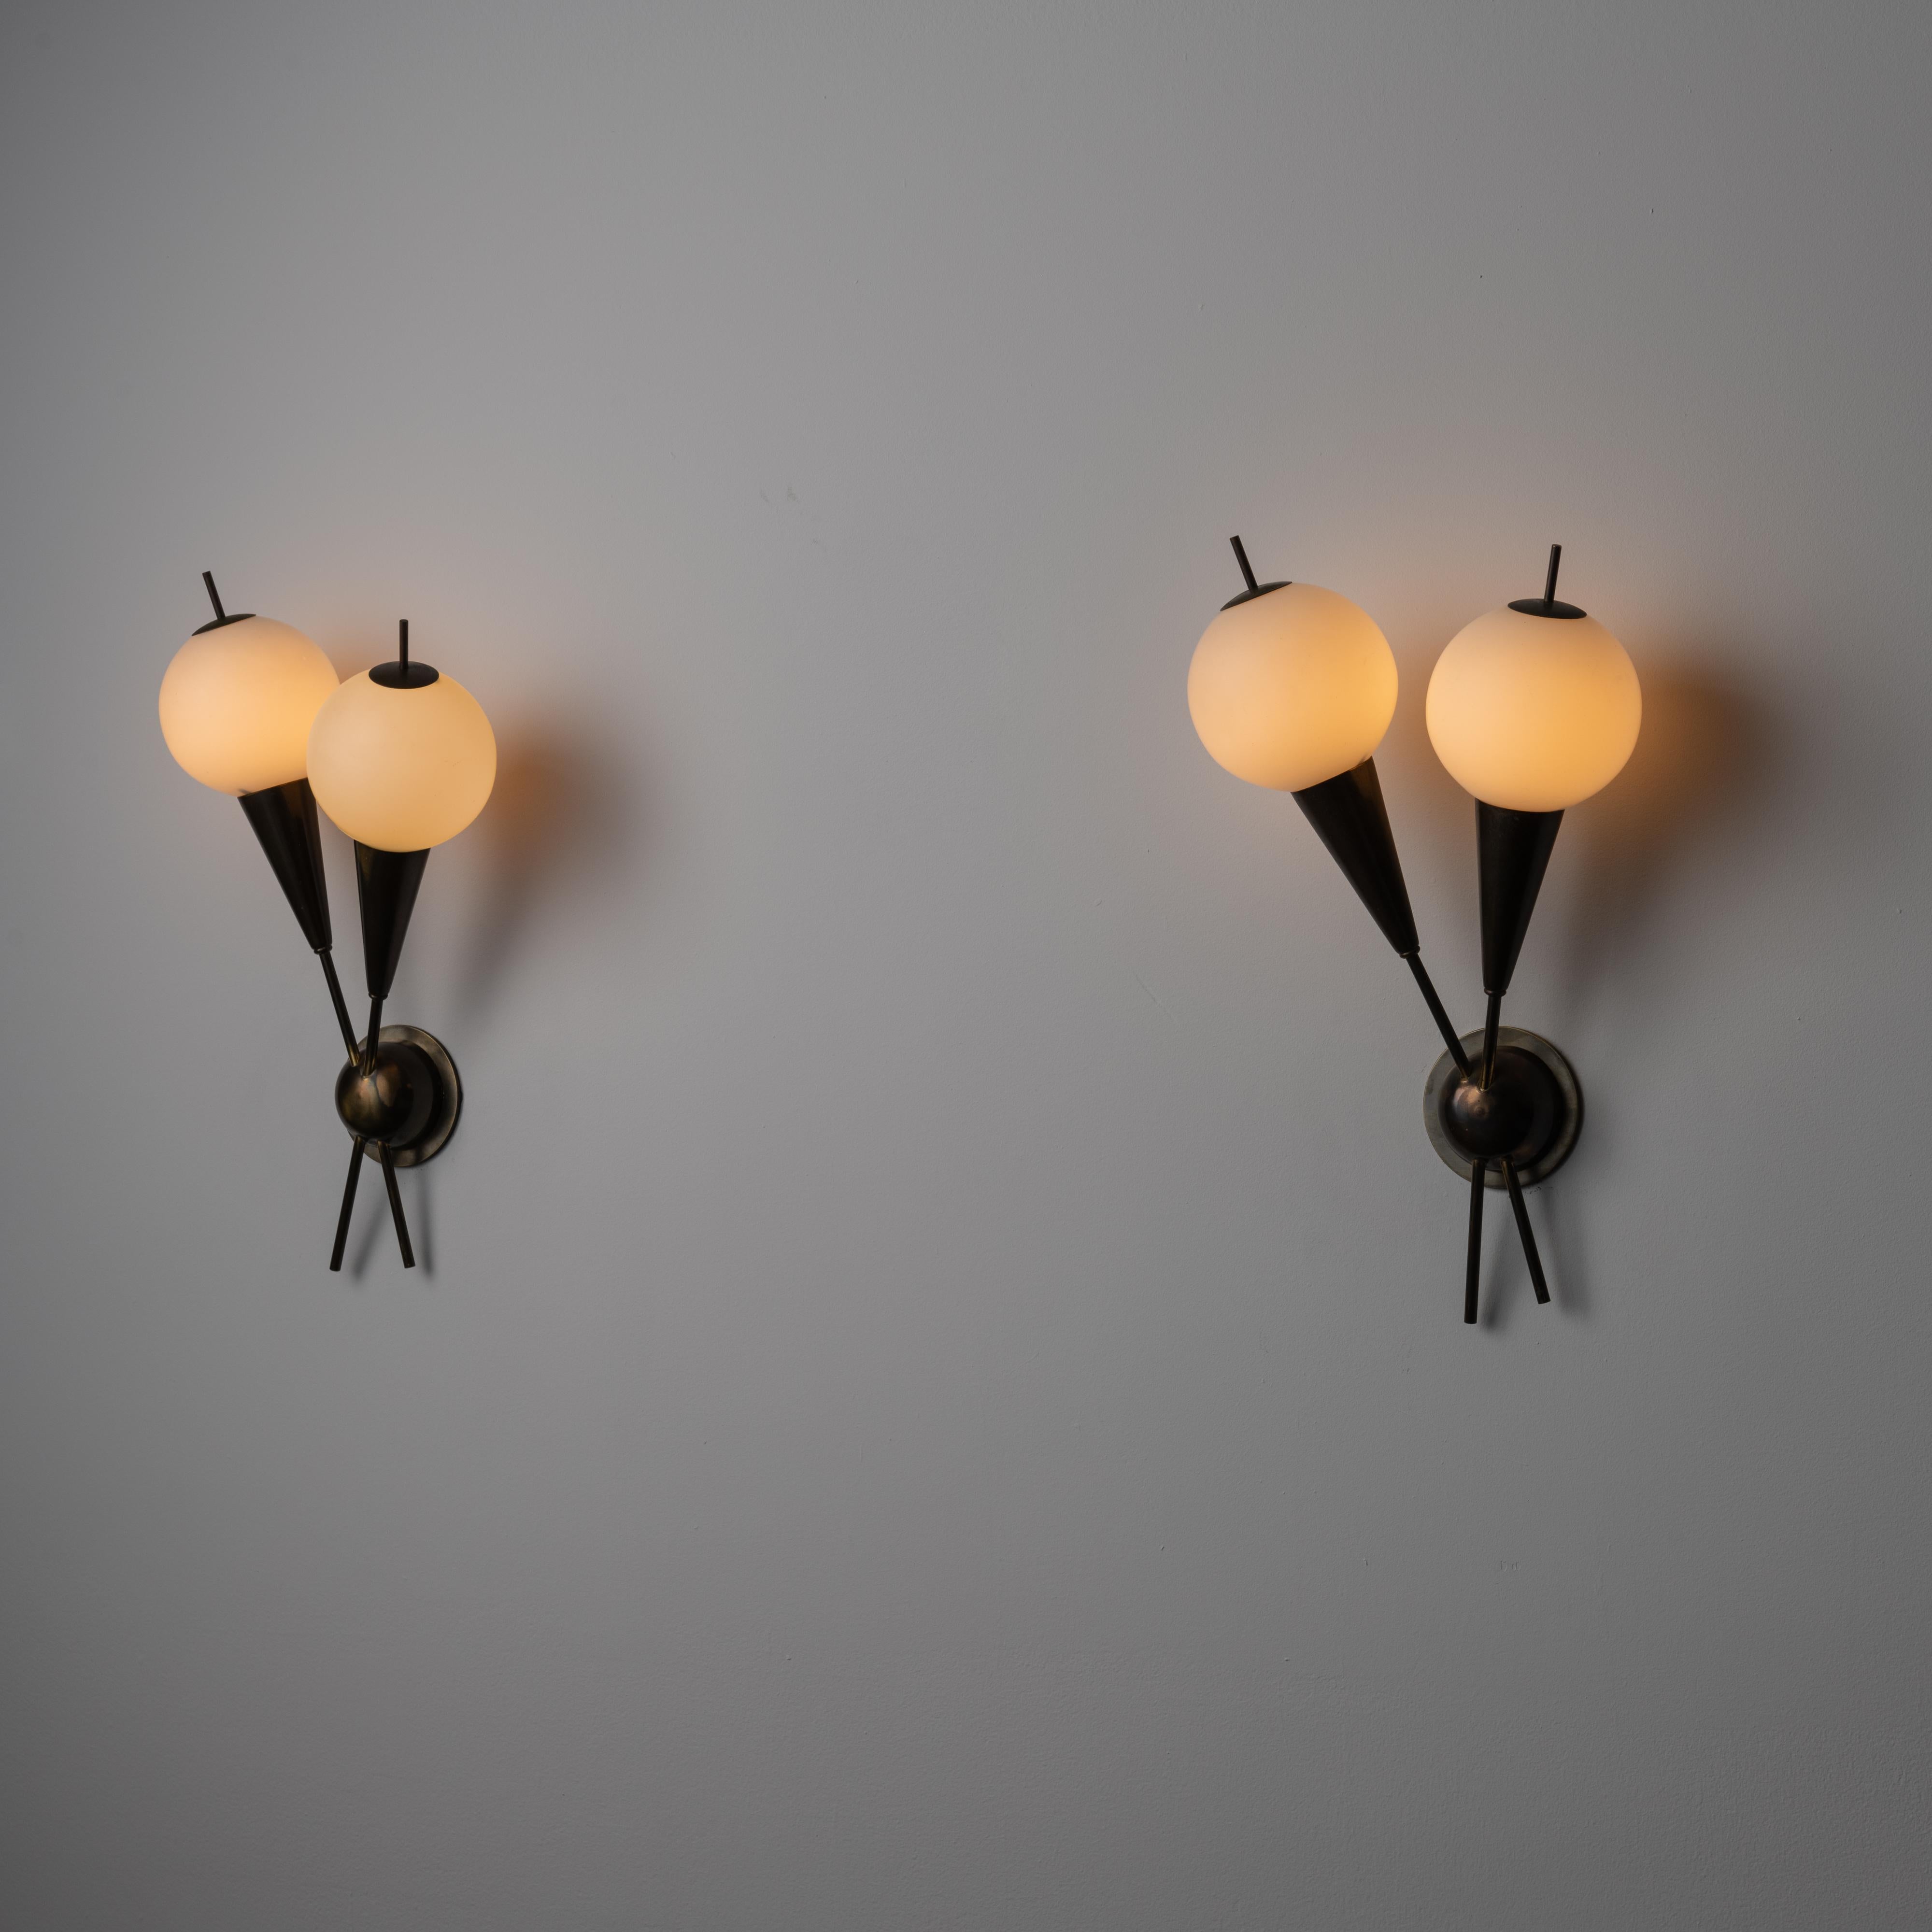 A pair of sconces by G.C.M.E. Designed and manufactured in Italy, circa the 1960s. A pair of sconces with nicely accented outer glass finials. Each sconce consists of two glass globes and armatures, criss-crossing over each other. Each globe houses